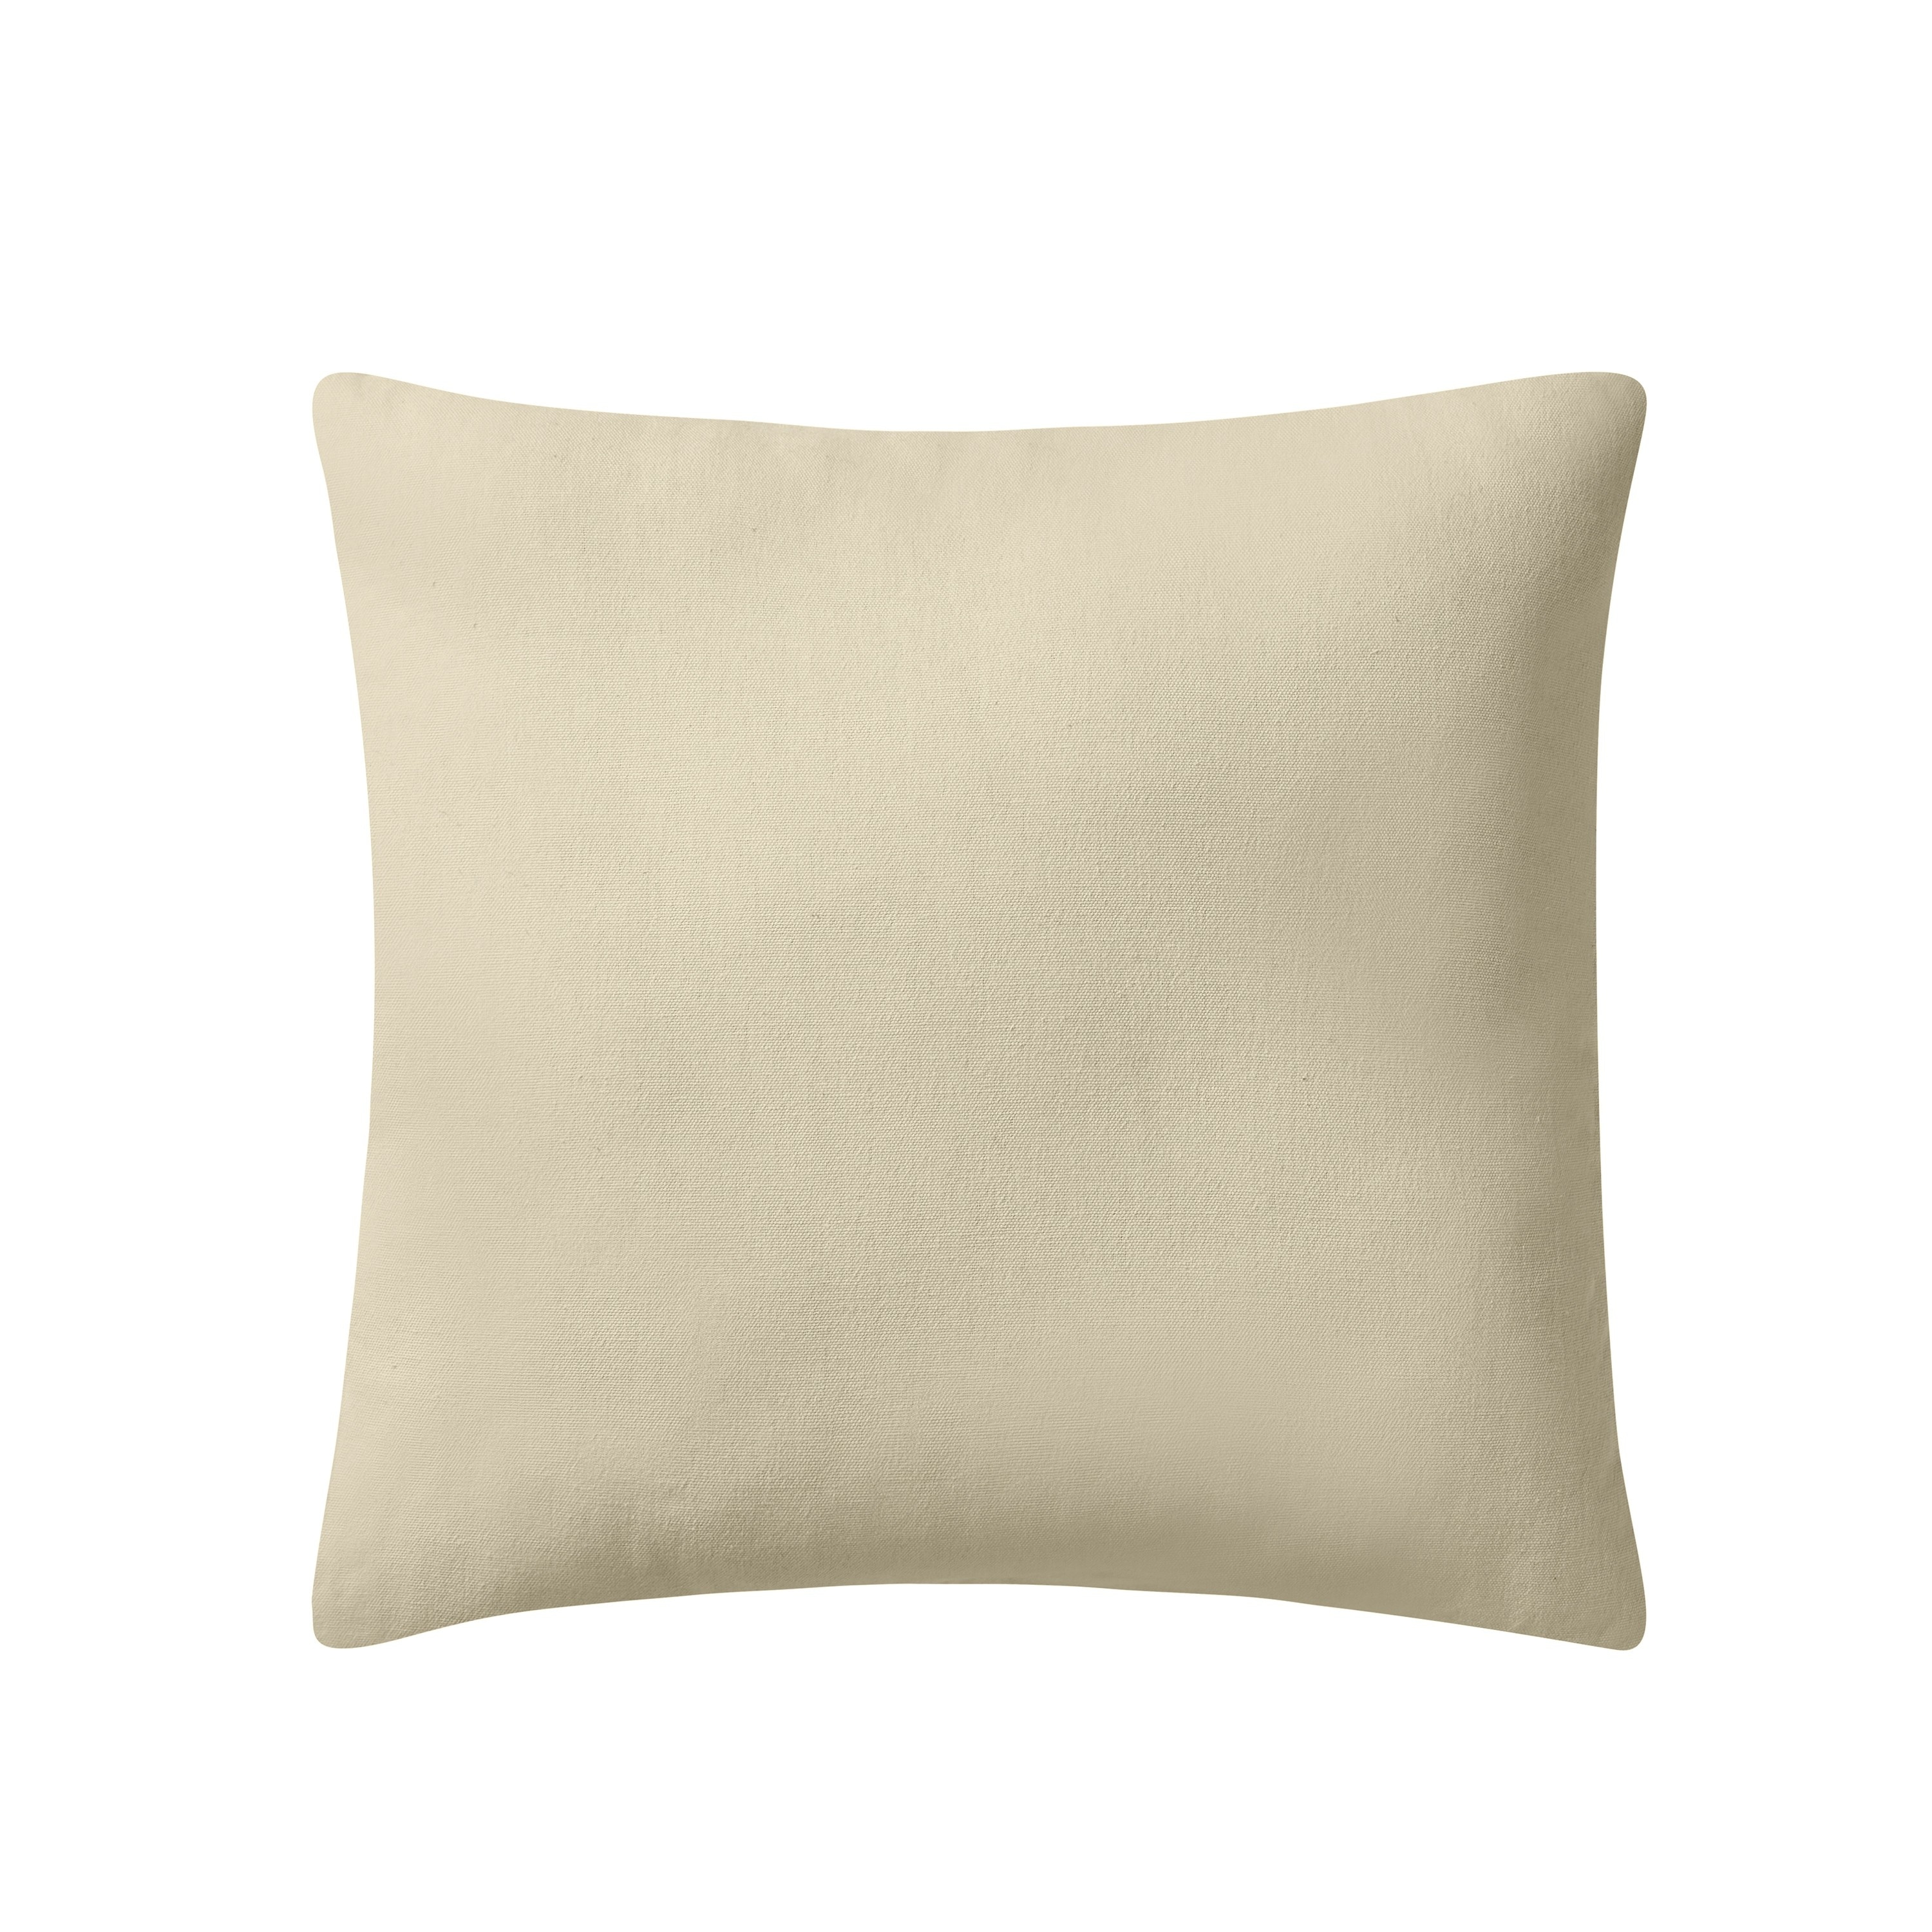 https://ak1.ostkcdn.com/images/products/is/images/direct/24b06a57513920f584a1cdf61f250fff3c729b7d/VCNY-Dublin-Cable-Knit-Rectangular-Decorative-Pillow.jpg